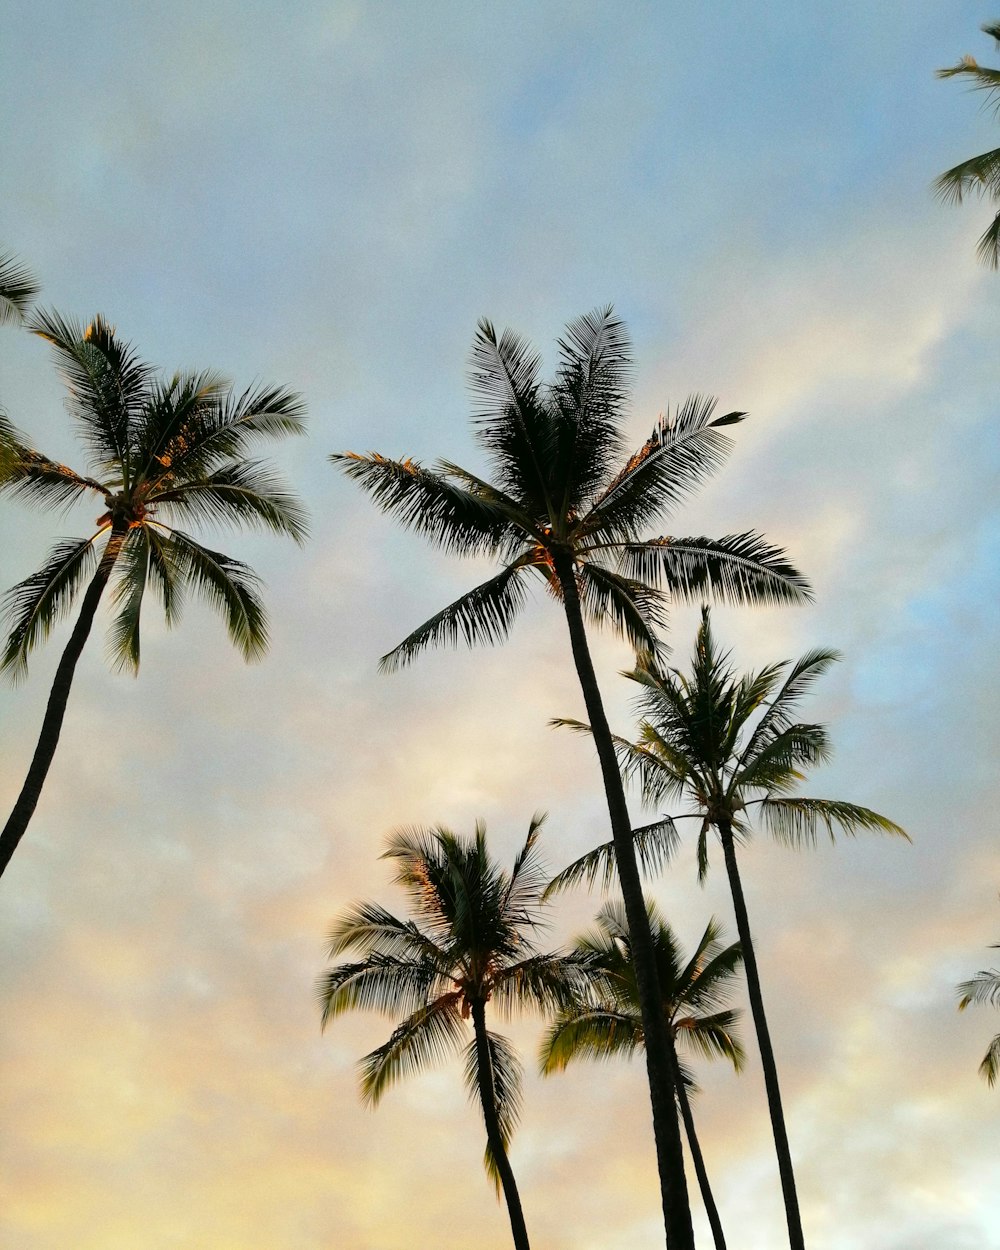 low-angle photography of coconut trees under blue and white skies